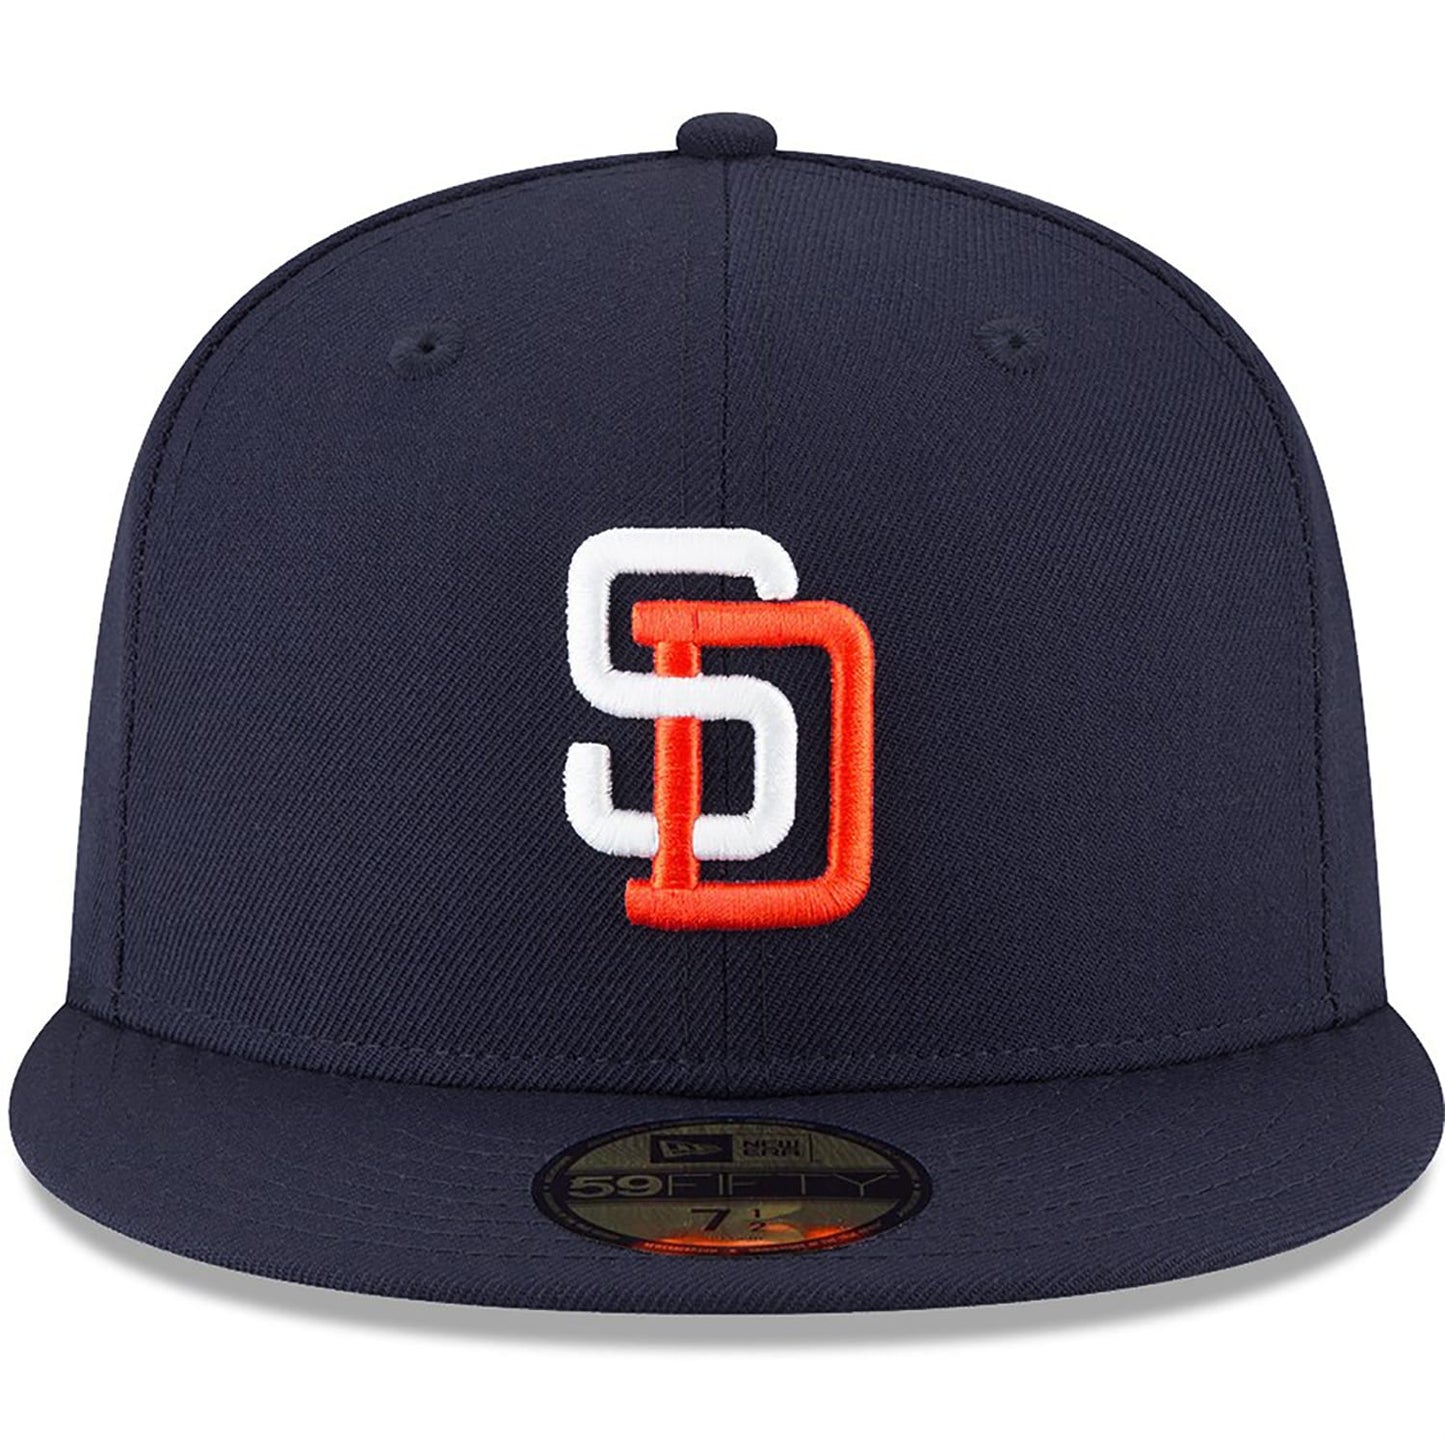 Men's San Diego Padres New Era 1991 Wool Classic 59FIFTY Fitted Hat